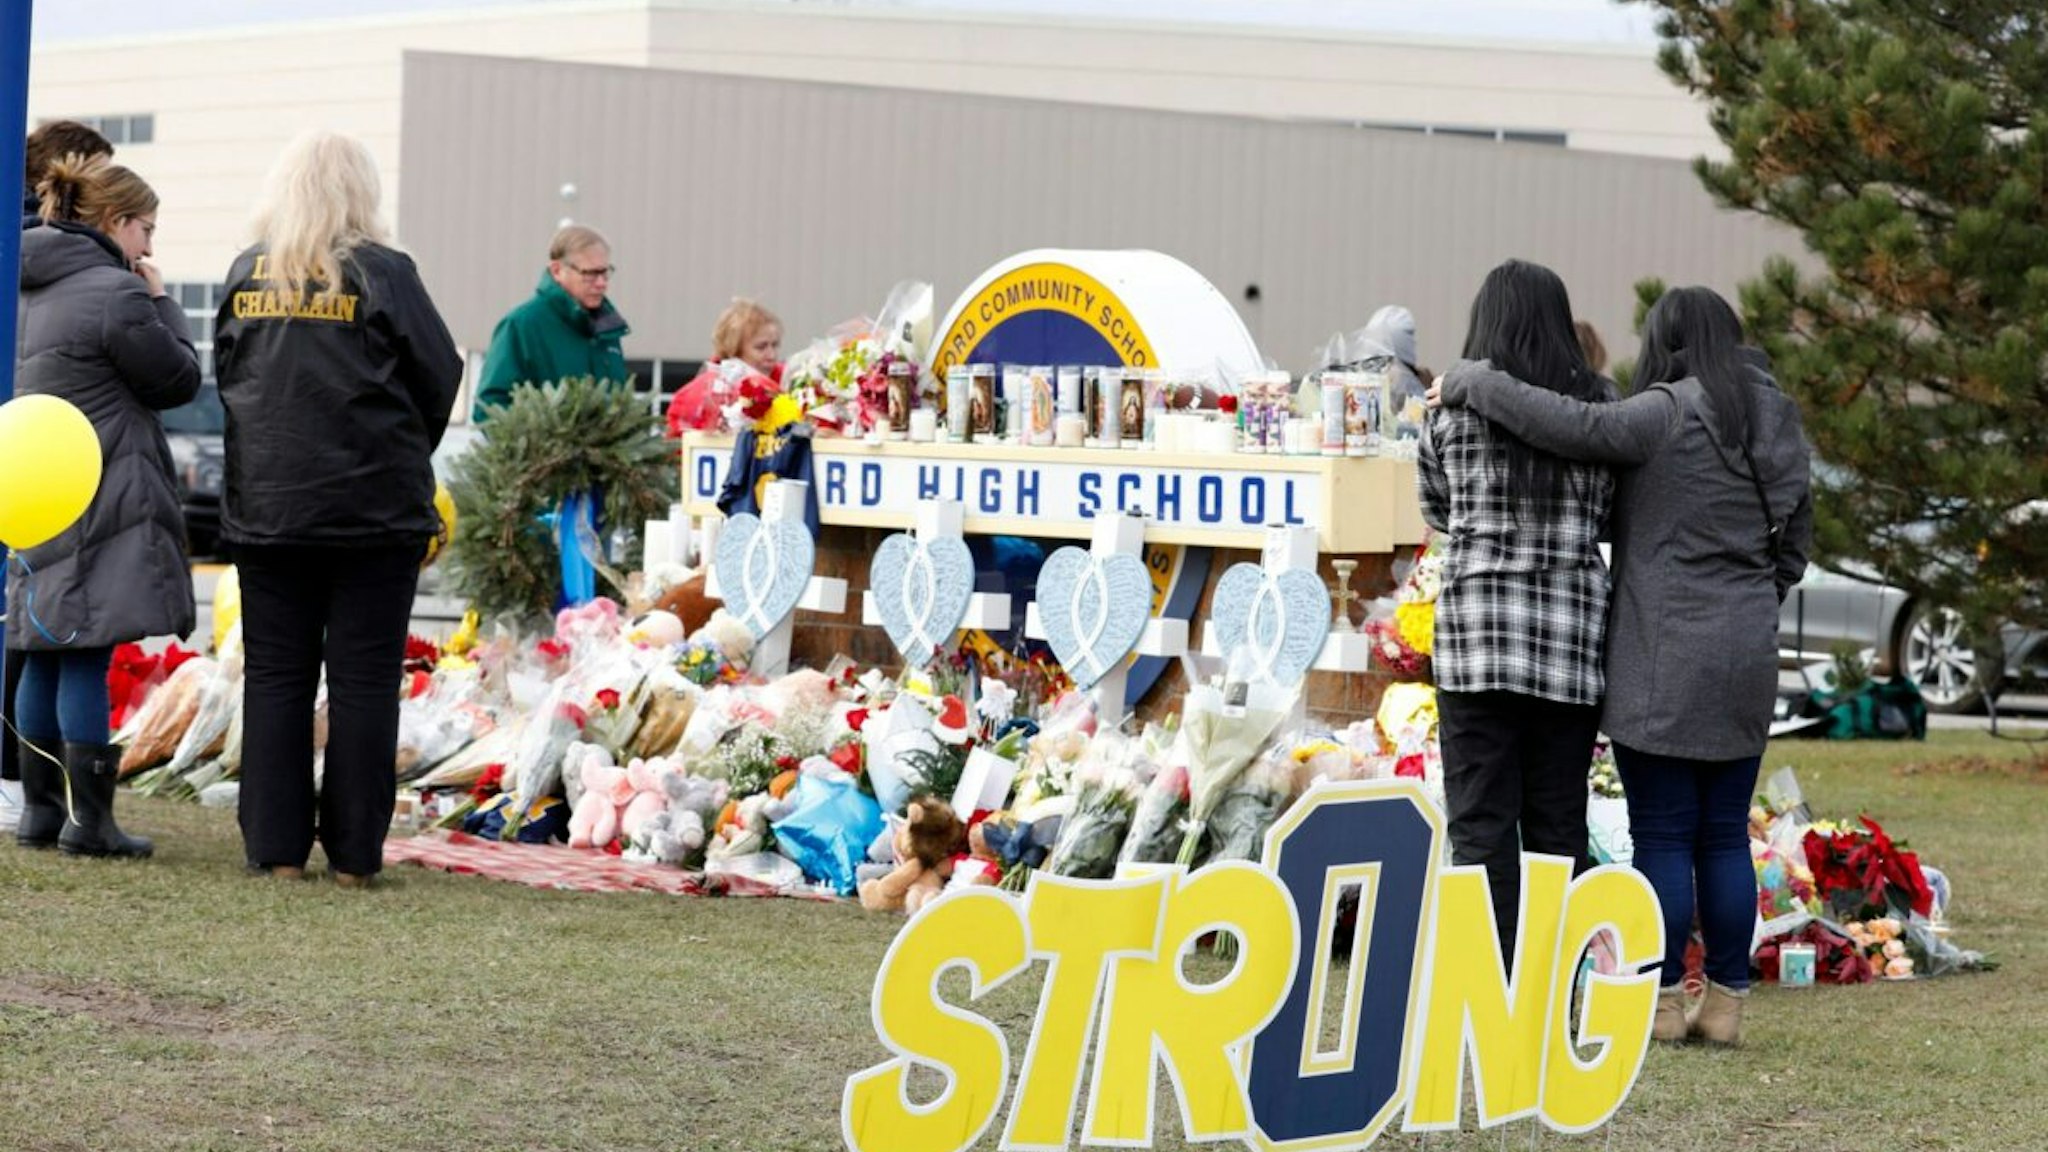 People gather at the memorial for the dead and wounded outside of Oxford High School in Oxford, Michigan on December 3, 2021. - The parents of a 15-year-old boy who shot dead four students at a high school in the US state of Michigan with a gun bought for him by his father just days earlier were charged with involuntary manslaughter.